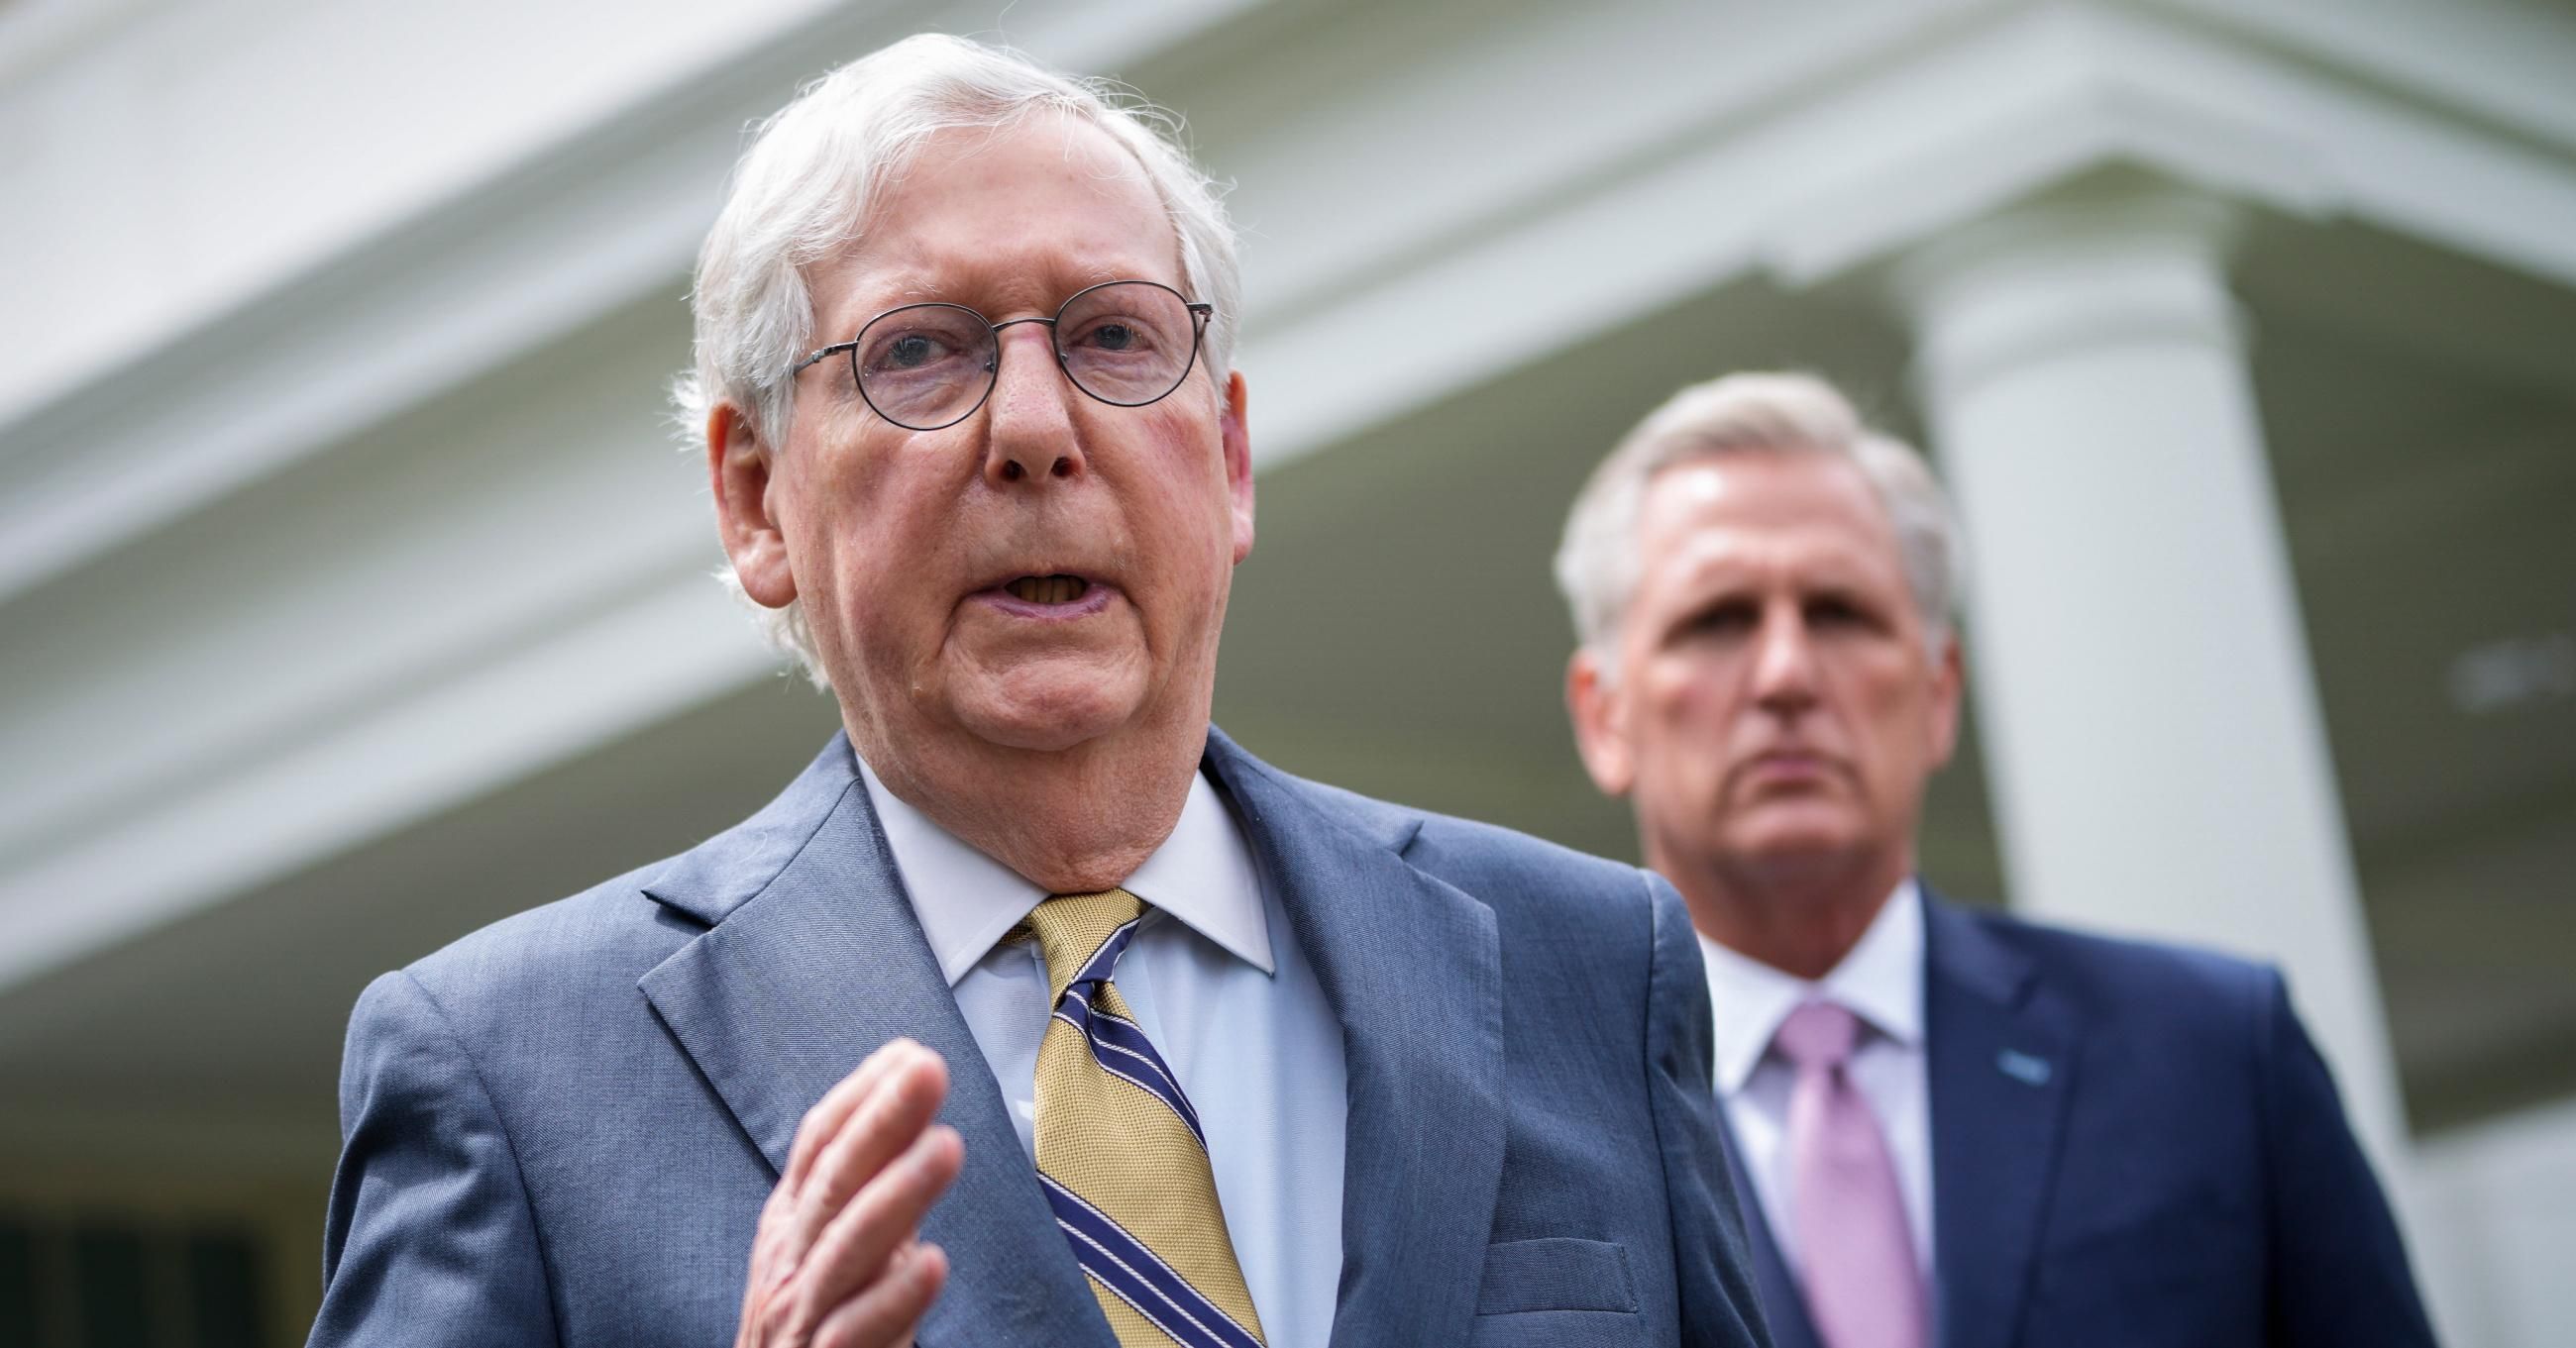 Senate Minority Leader Mitch McConnell (R-Ky.) and House Minority Leader Kevin McCarthy (R-Calif.) address reporters outside the White House